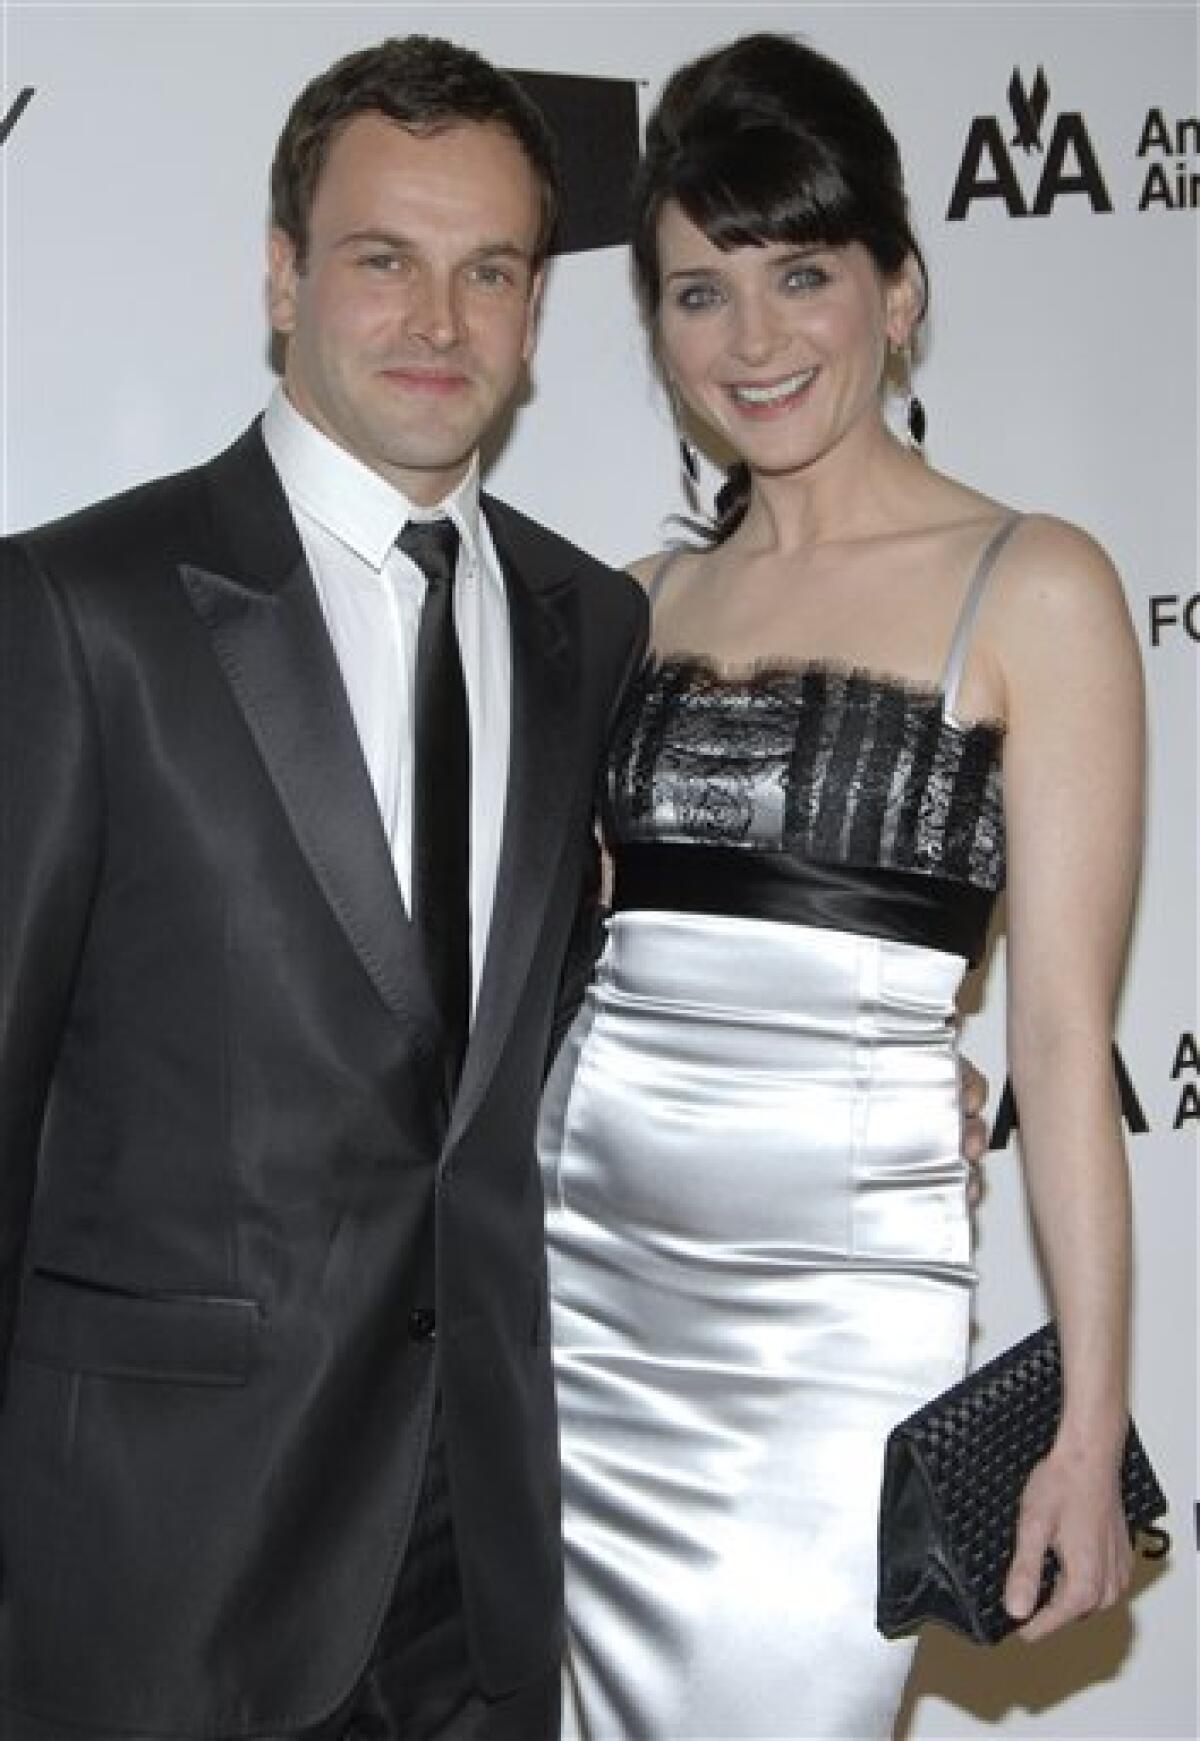 Actor Johnny Lee Miller and Michele Hicks poses on the press line at the Elton John Oscar Party in West Hollywood, Calif. on Sunday, Feb. 24, 2008. Miller has given birth to a baby boy. A publicist for Miller says actress and model Michele Hicks gave birth Wednesday to Buster Timothy Miller in Los Angeles. Publicist Ina Treciokas says the baby boy weighed 9 pounds and is the couple's first child. (AP Photo/Dan Steinberg)